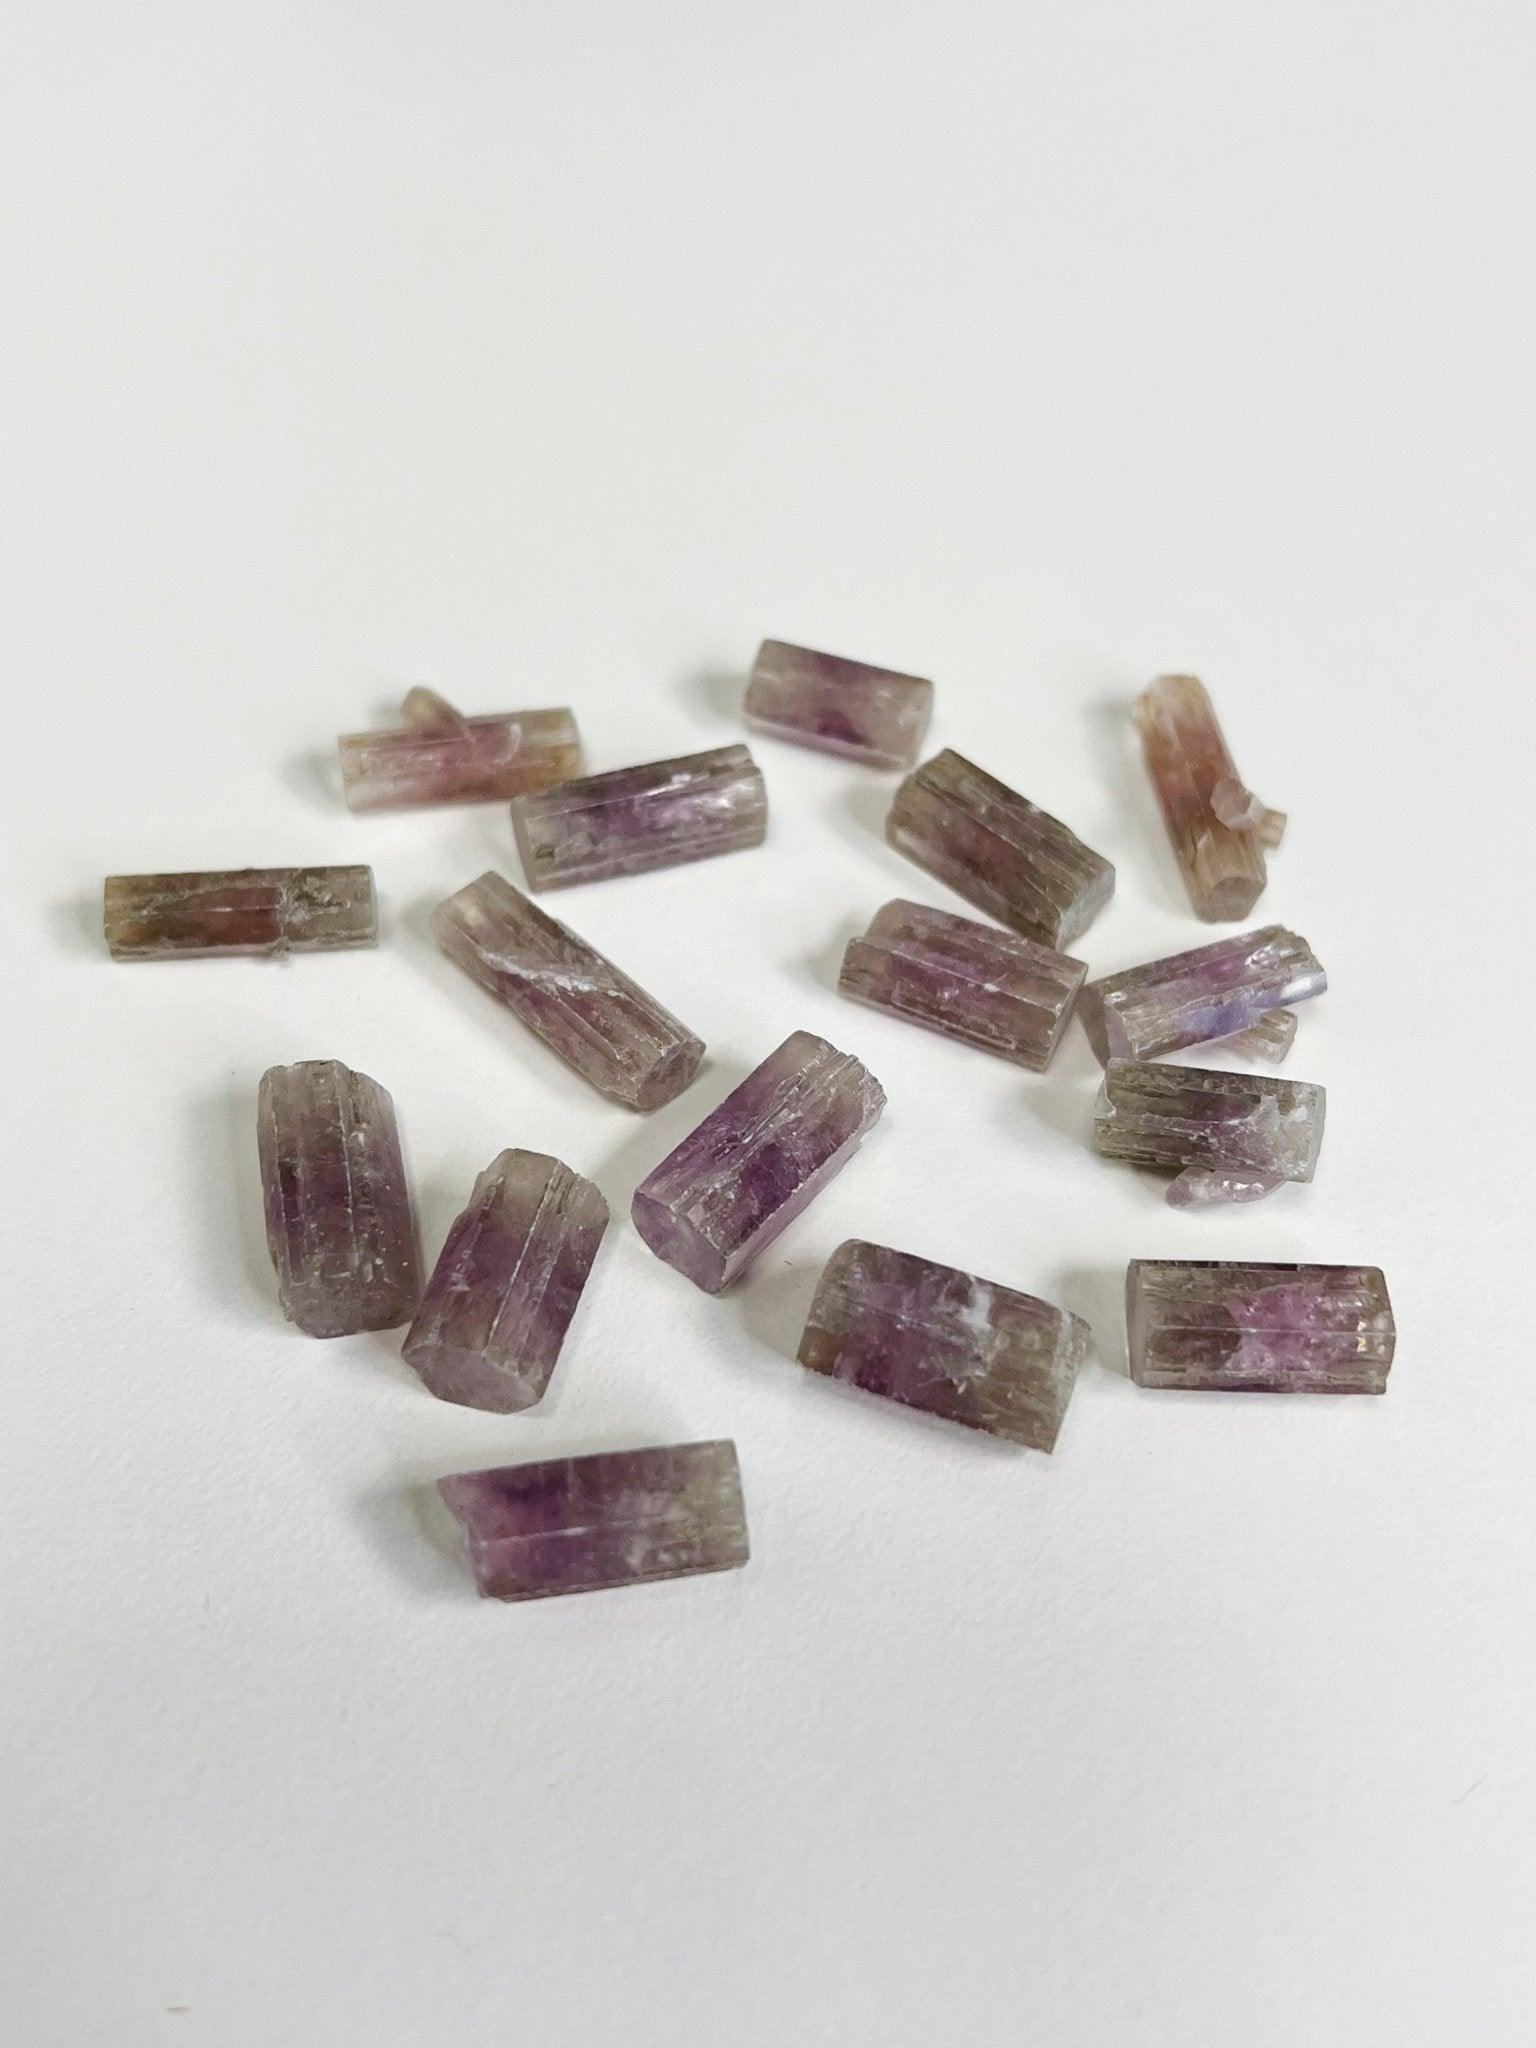 PURPLE TWINNED SPANISH ARAGONITE - SINGLE CRYSTAL - 33 bday, 444 sale, aragonite, end of year sale, holiday sale, new year sale, pocket crystal, pocket stone, purple aragonite, raw crystal, raw stone, rough crystal, Rough Stone - The Mineral Maven